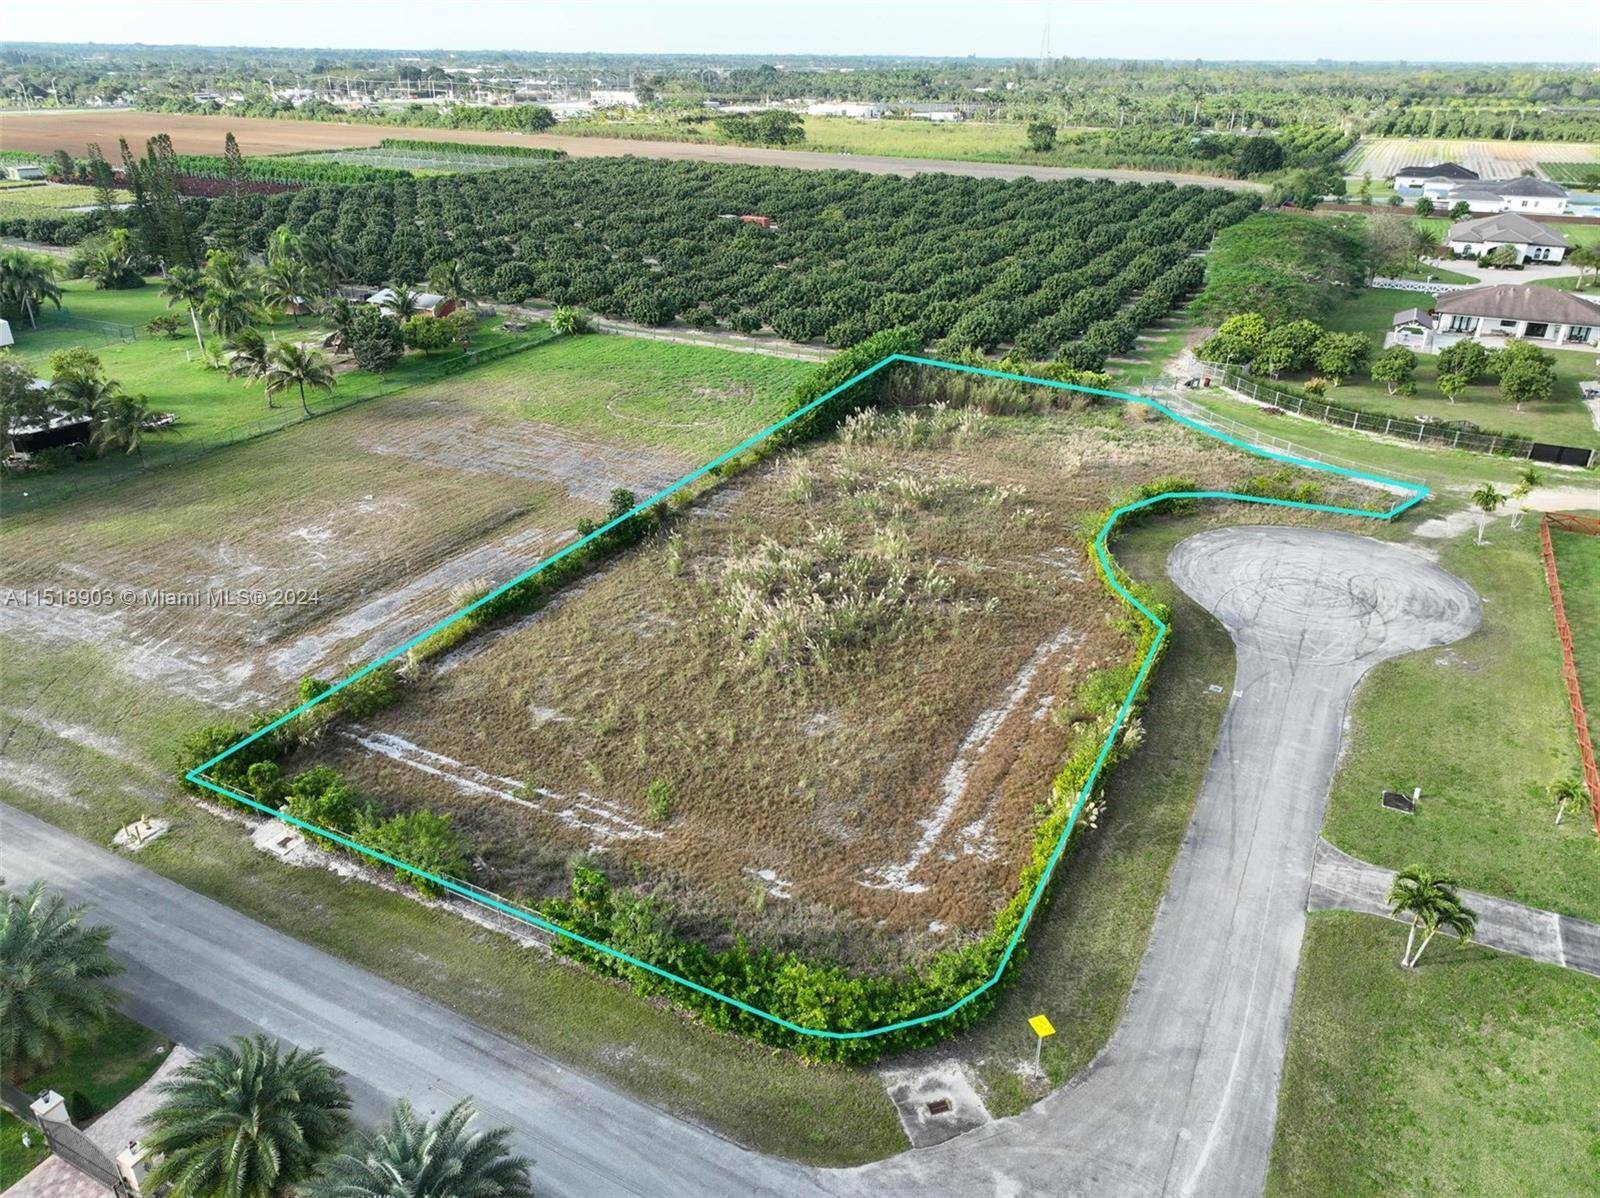 Introducing an extraordinary opportunity to build your home on a cul de sac nestled within the idyllic Redland neighborhood of Homestead.